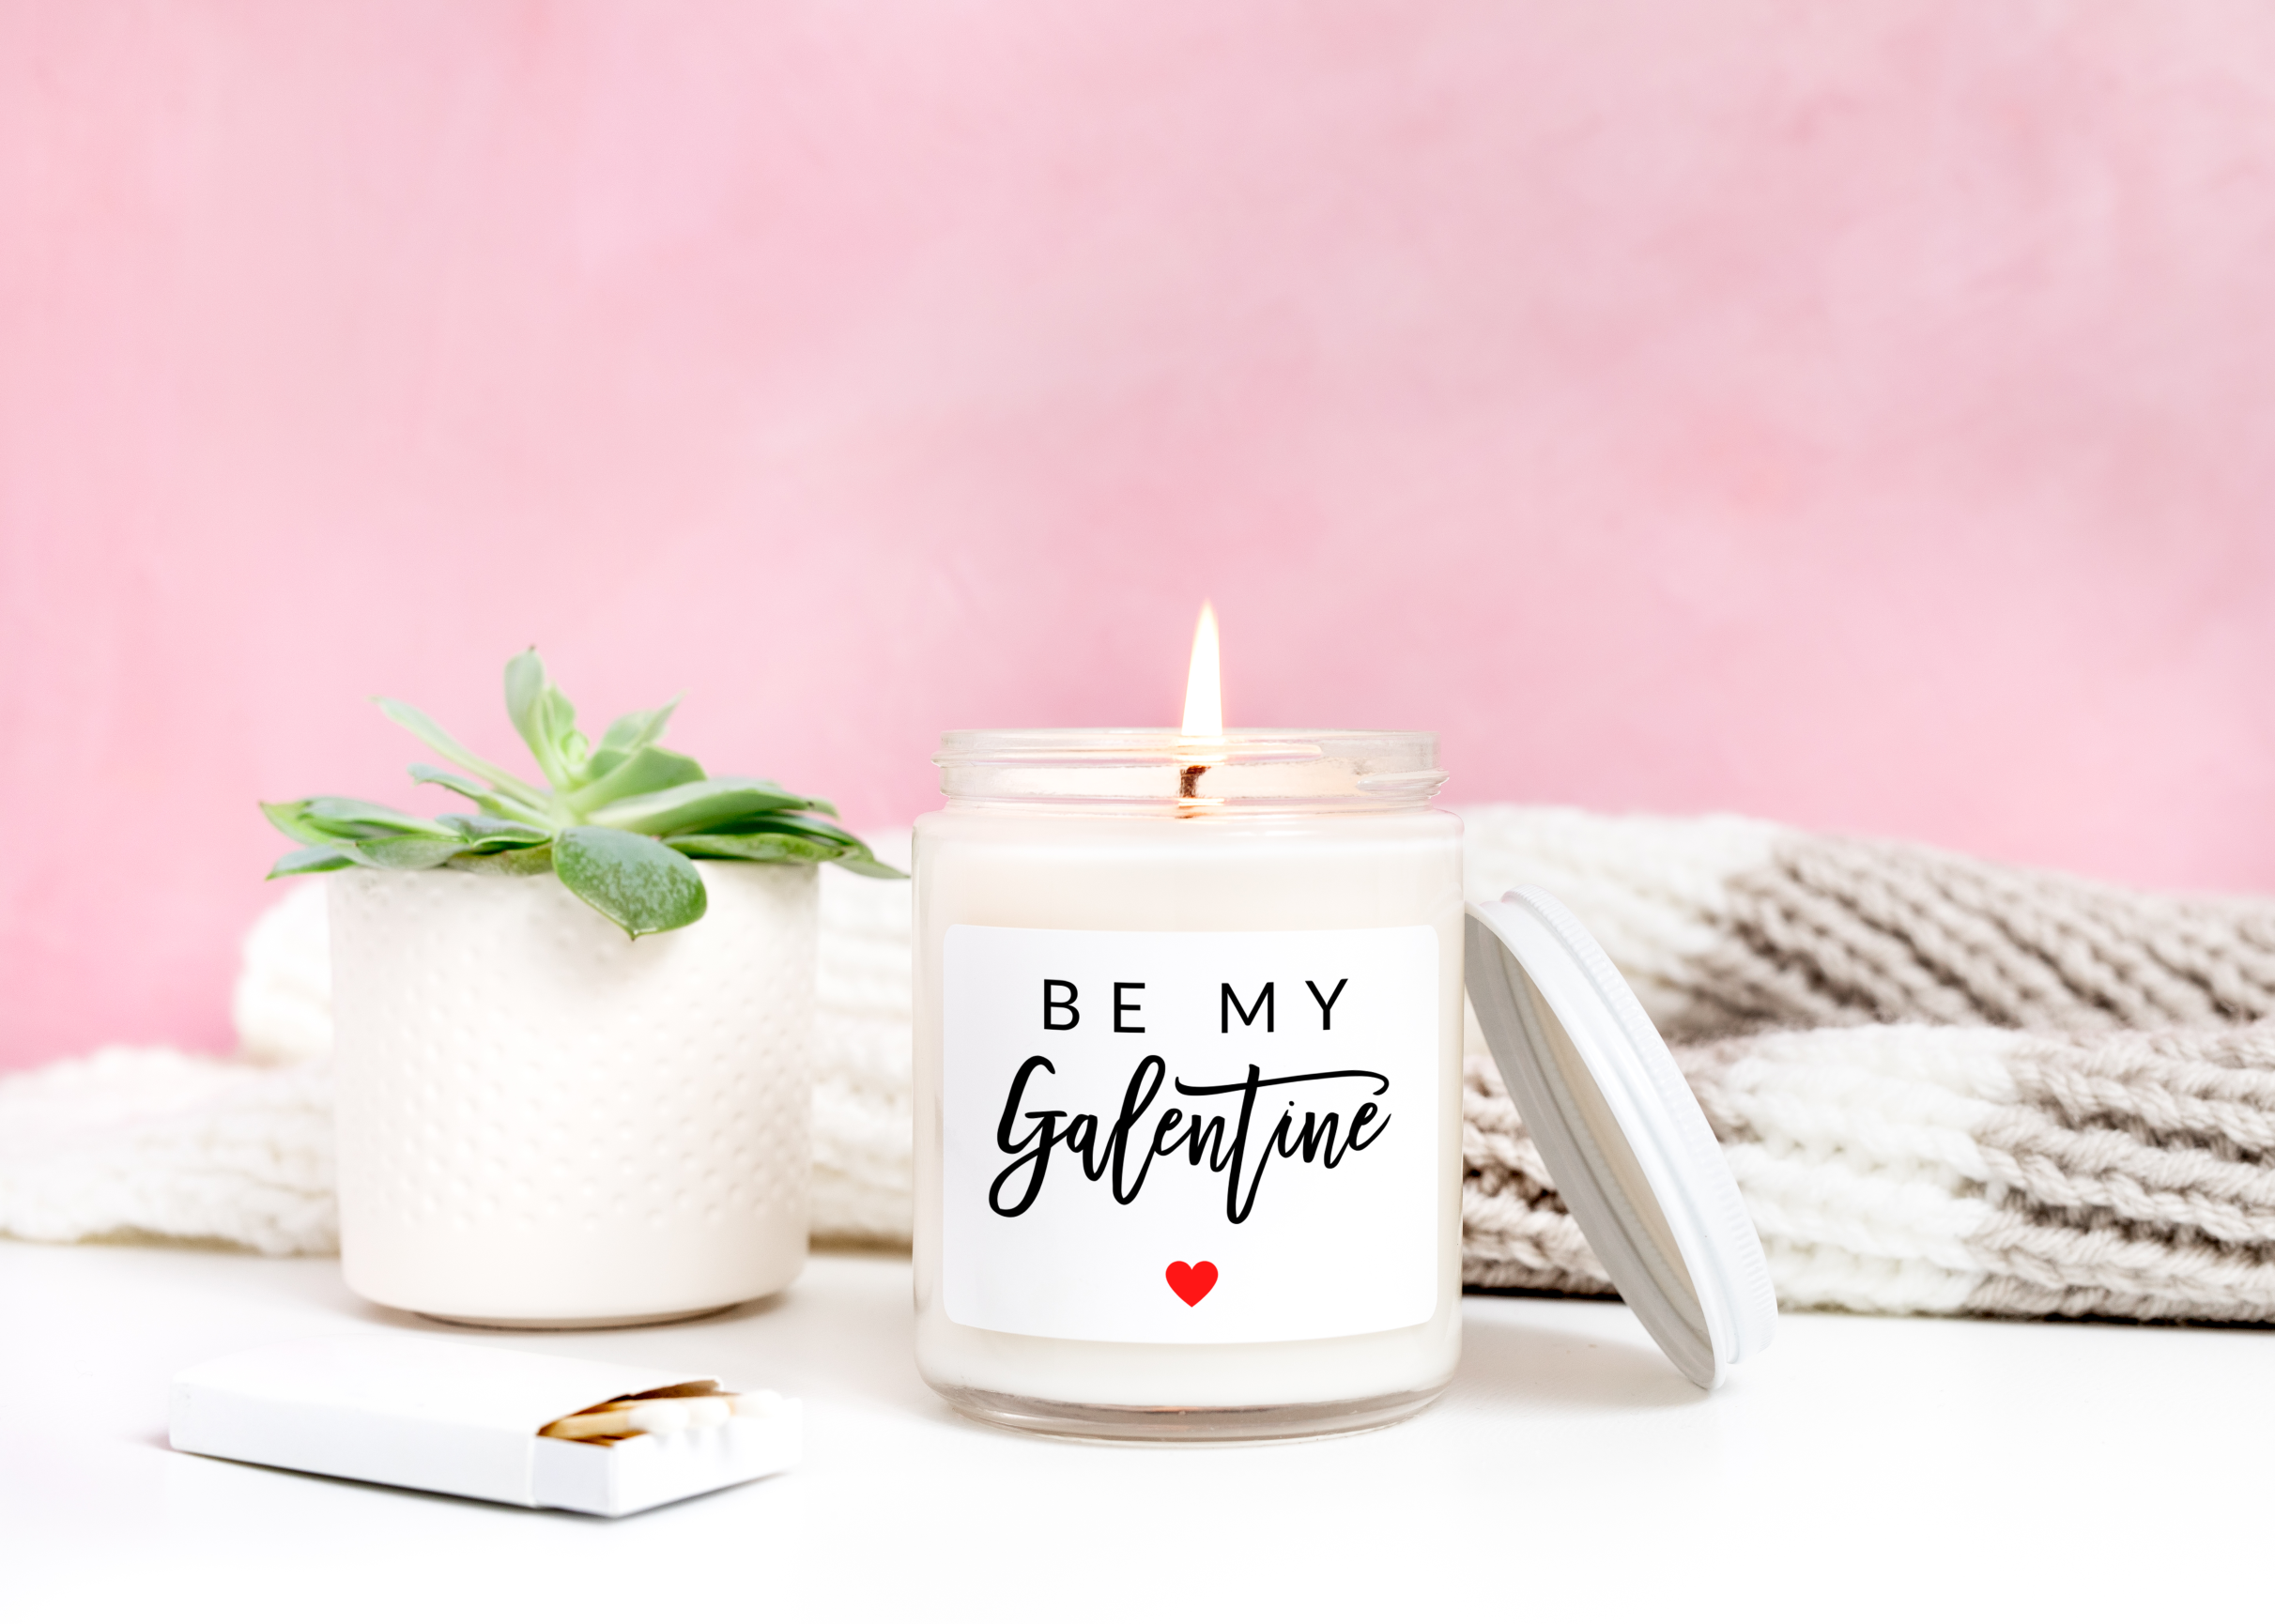 Be my galentine candle lit in front of a pink background.